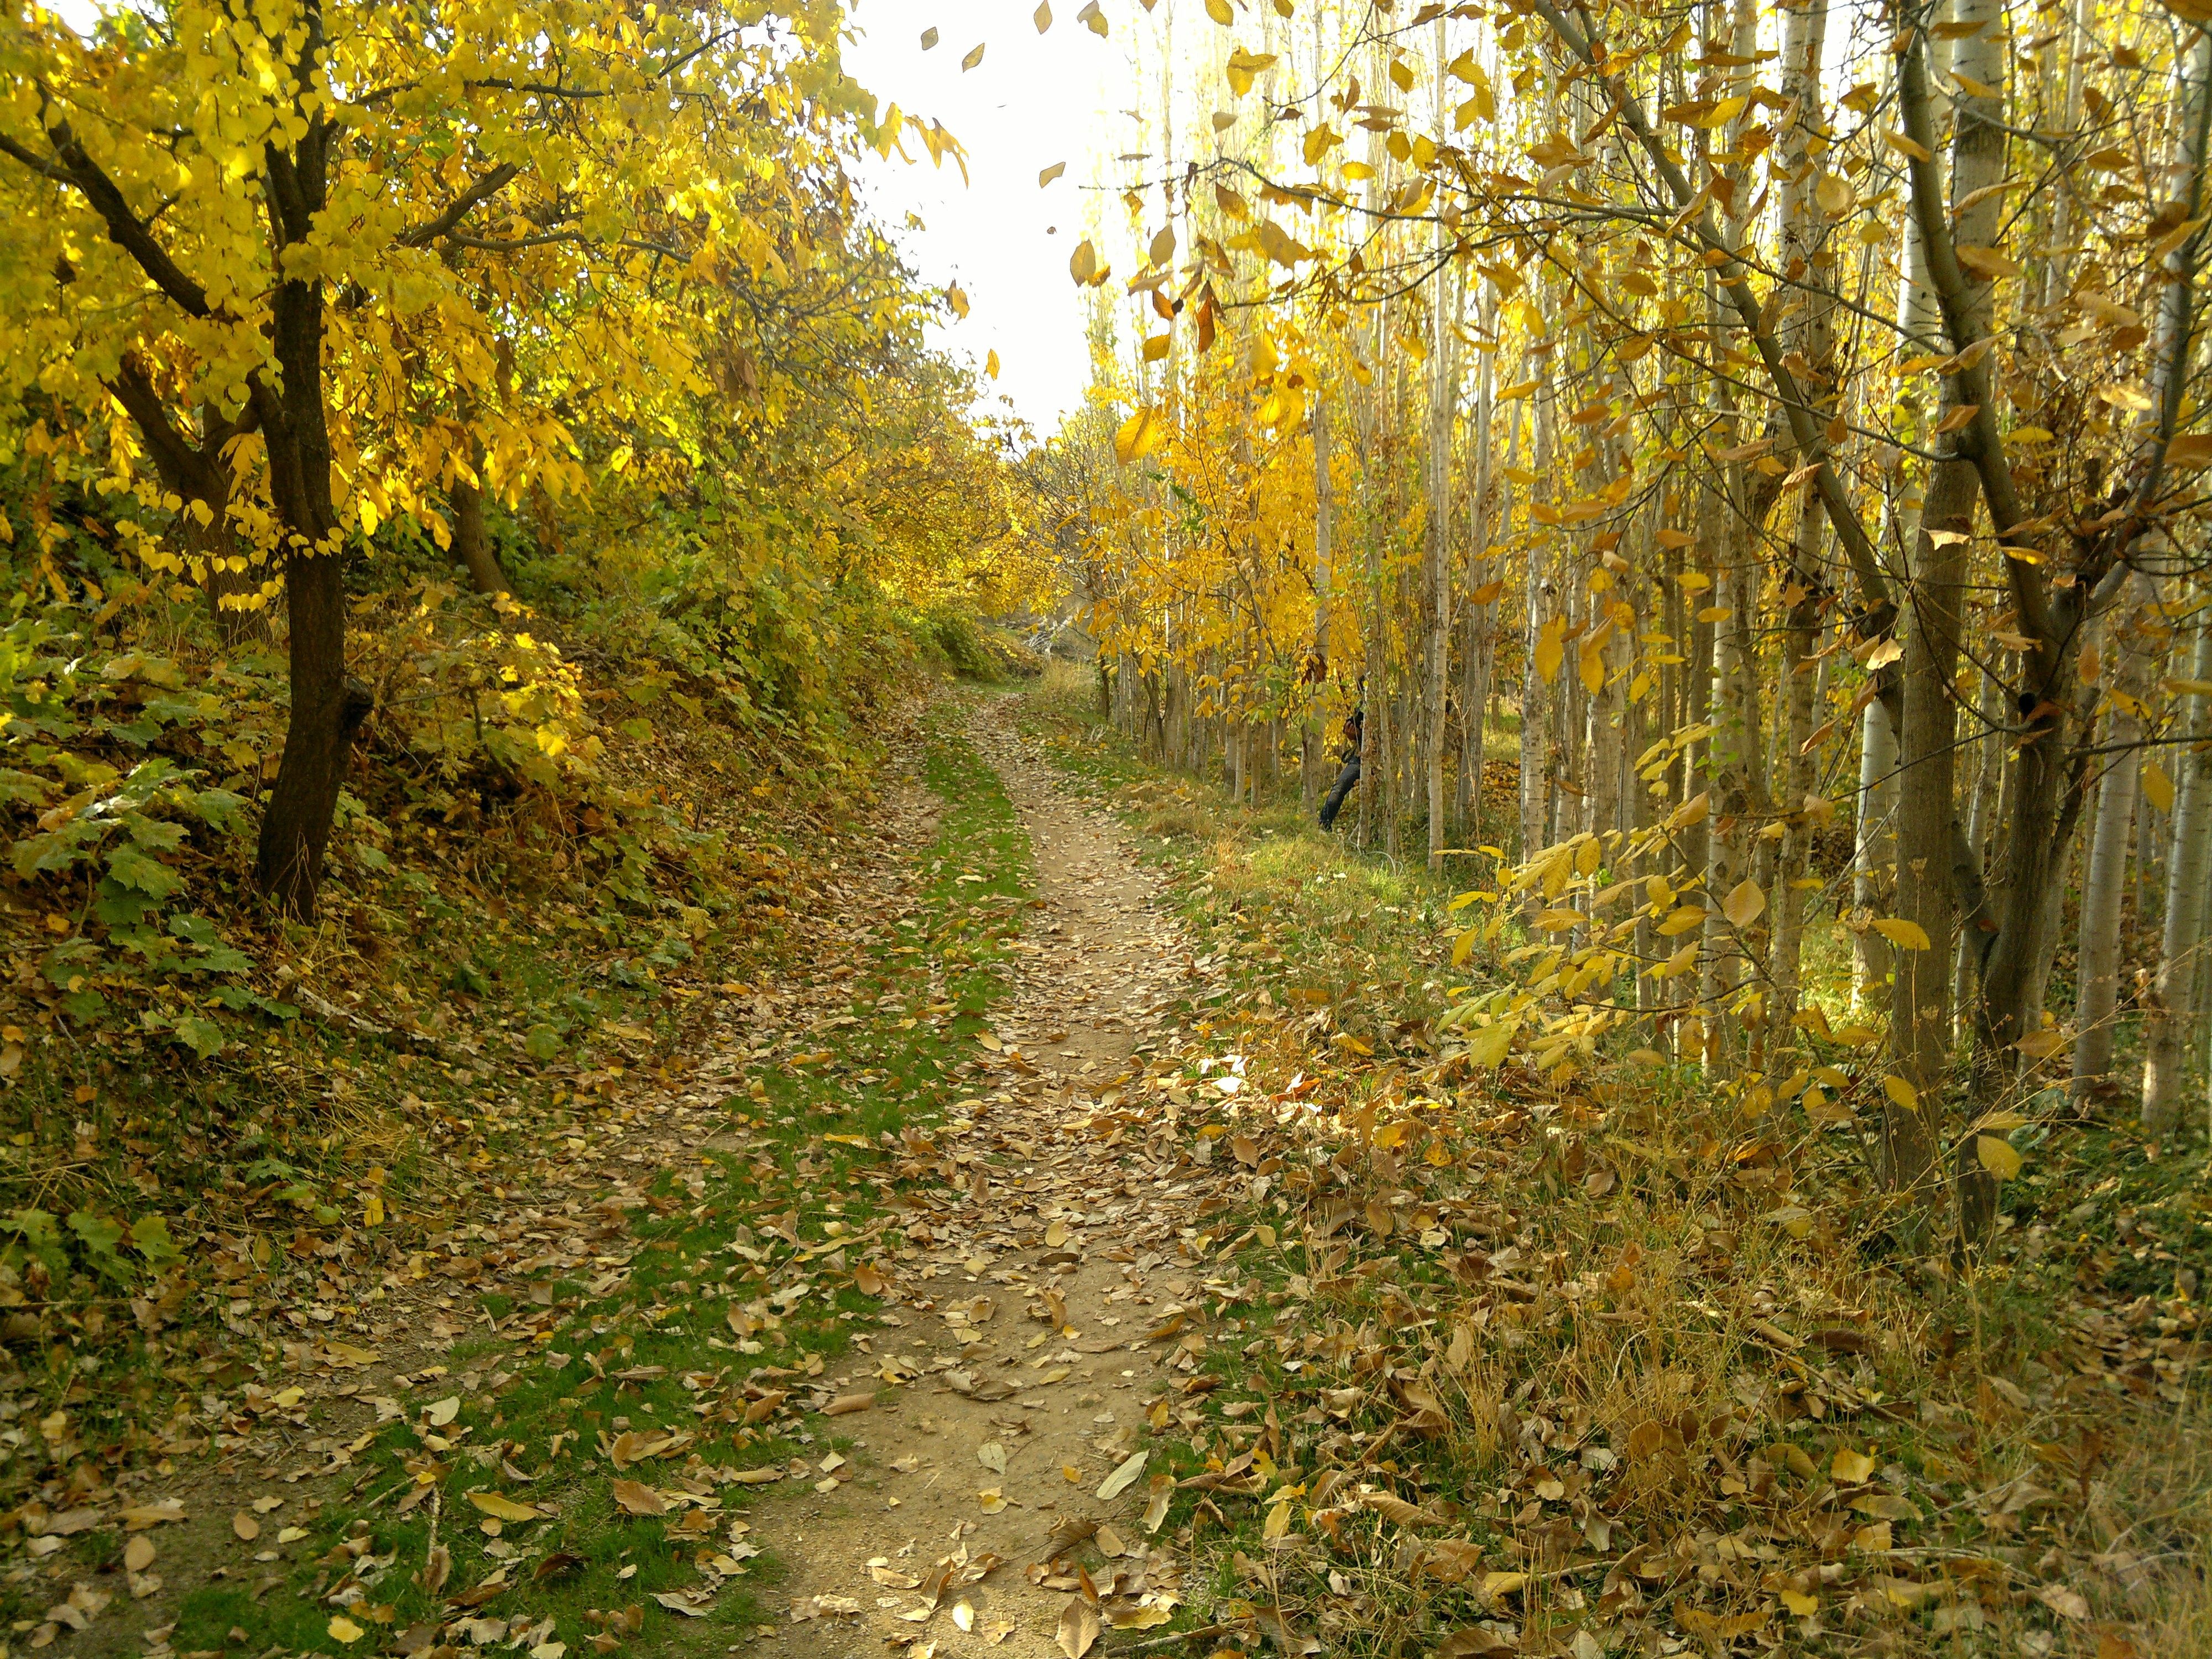 General 4000x3000 forest trees birch path fallen leaves outdoors